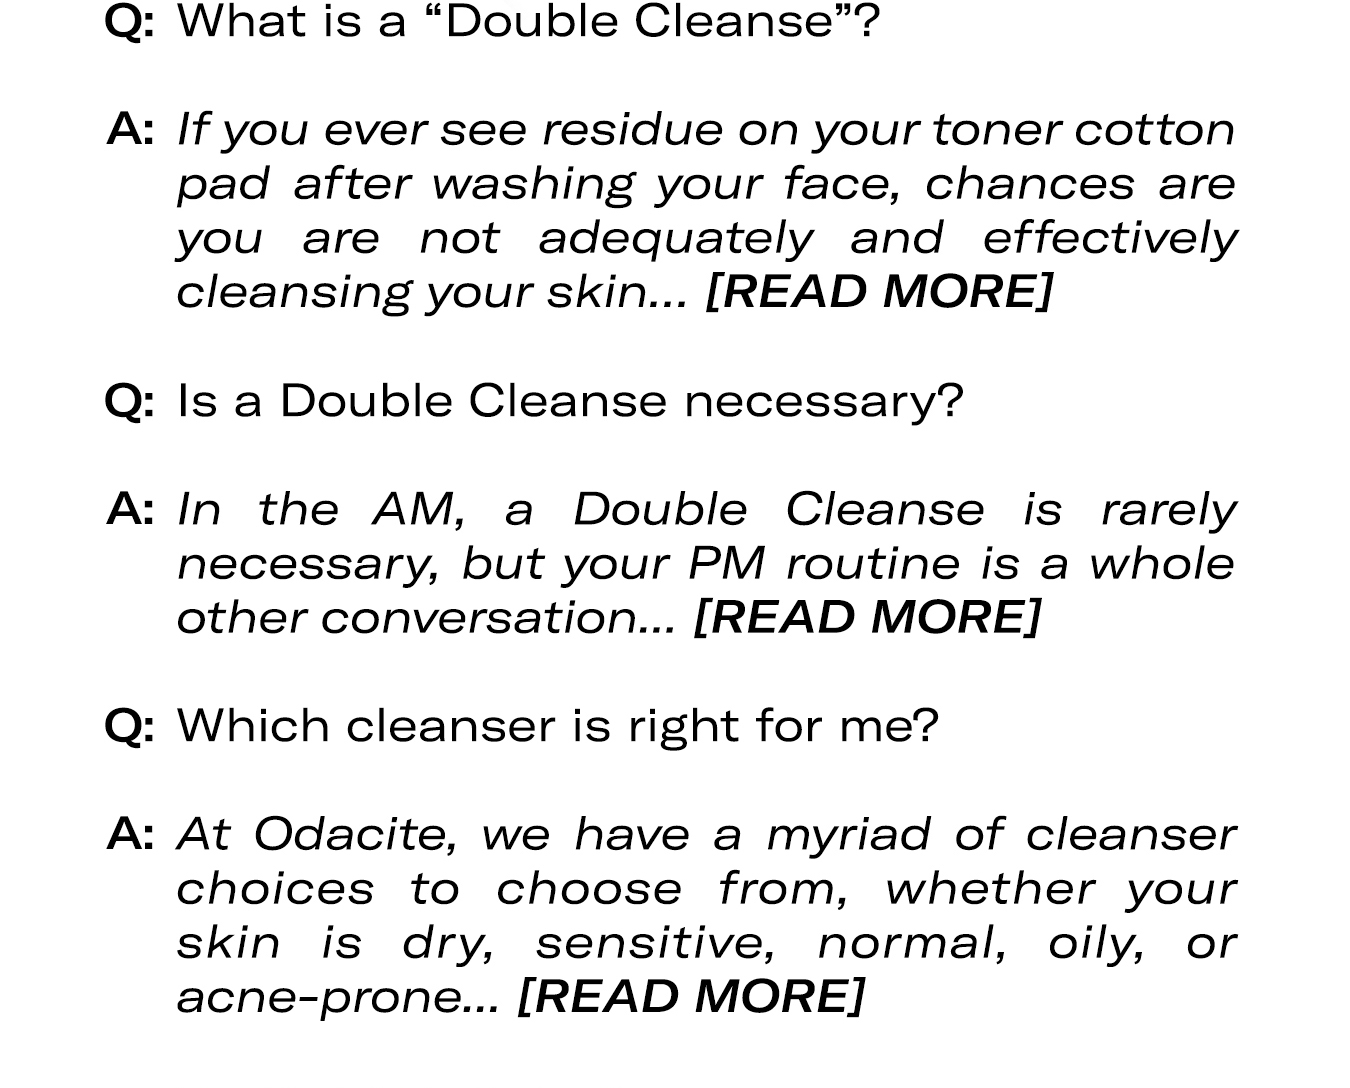 Read more about Double Cleansing